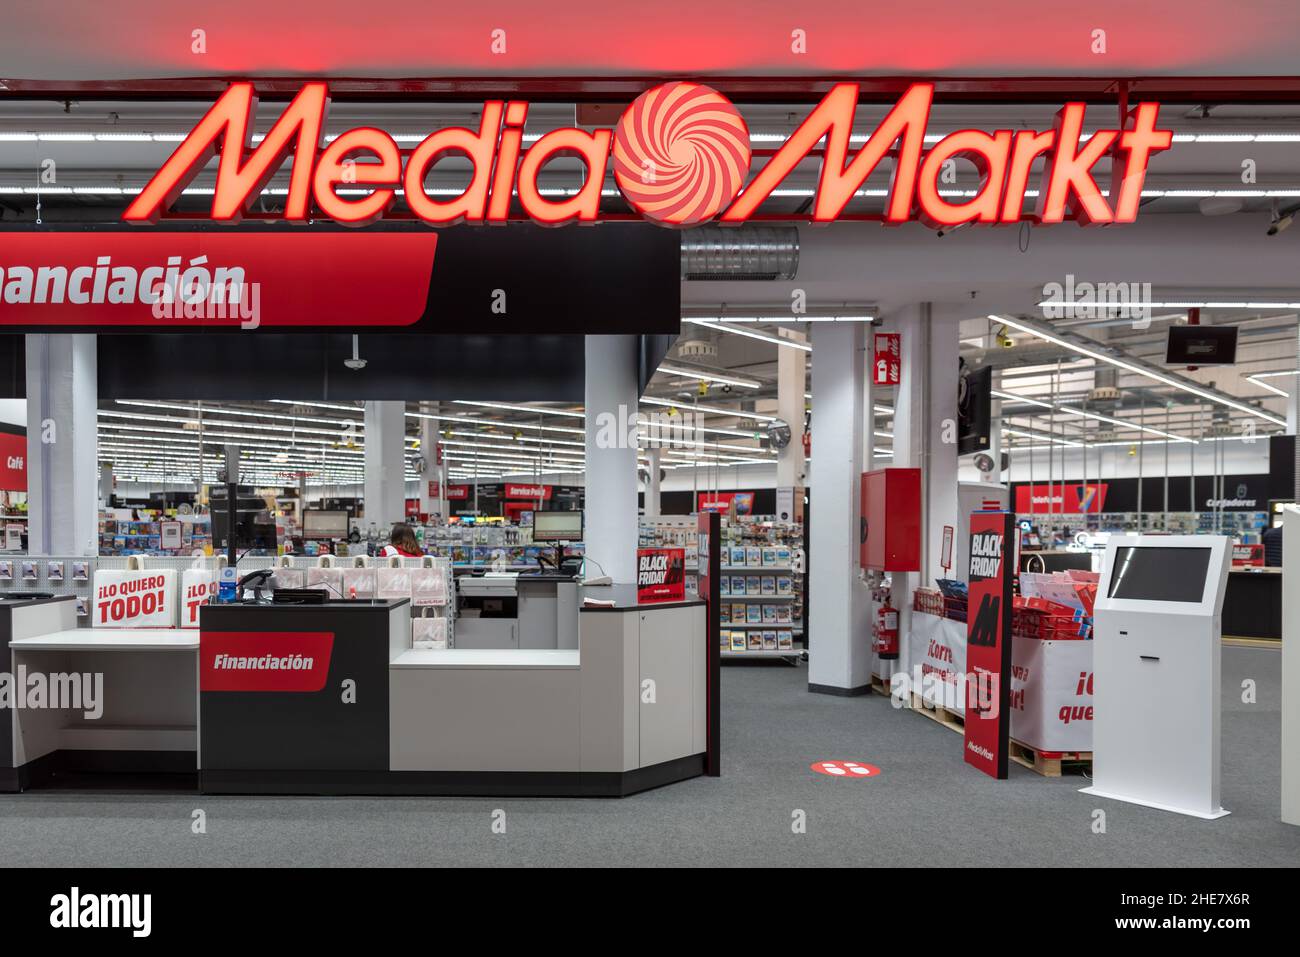 Page 3 - Media Markt High Resolution Stock Photography and Images - Alamy